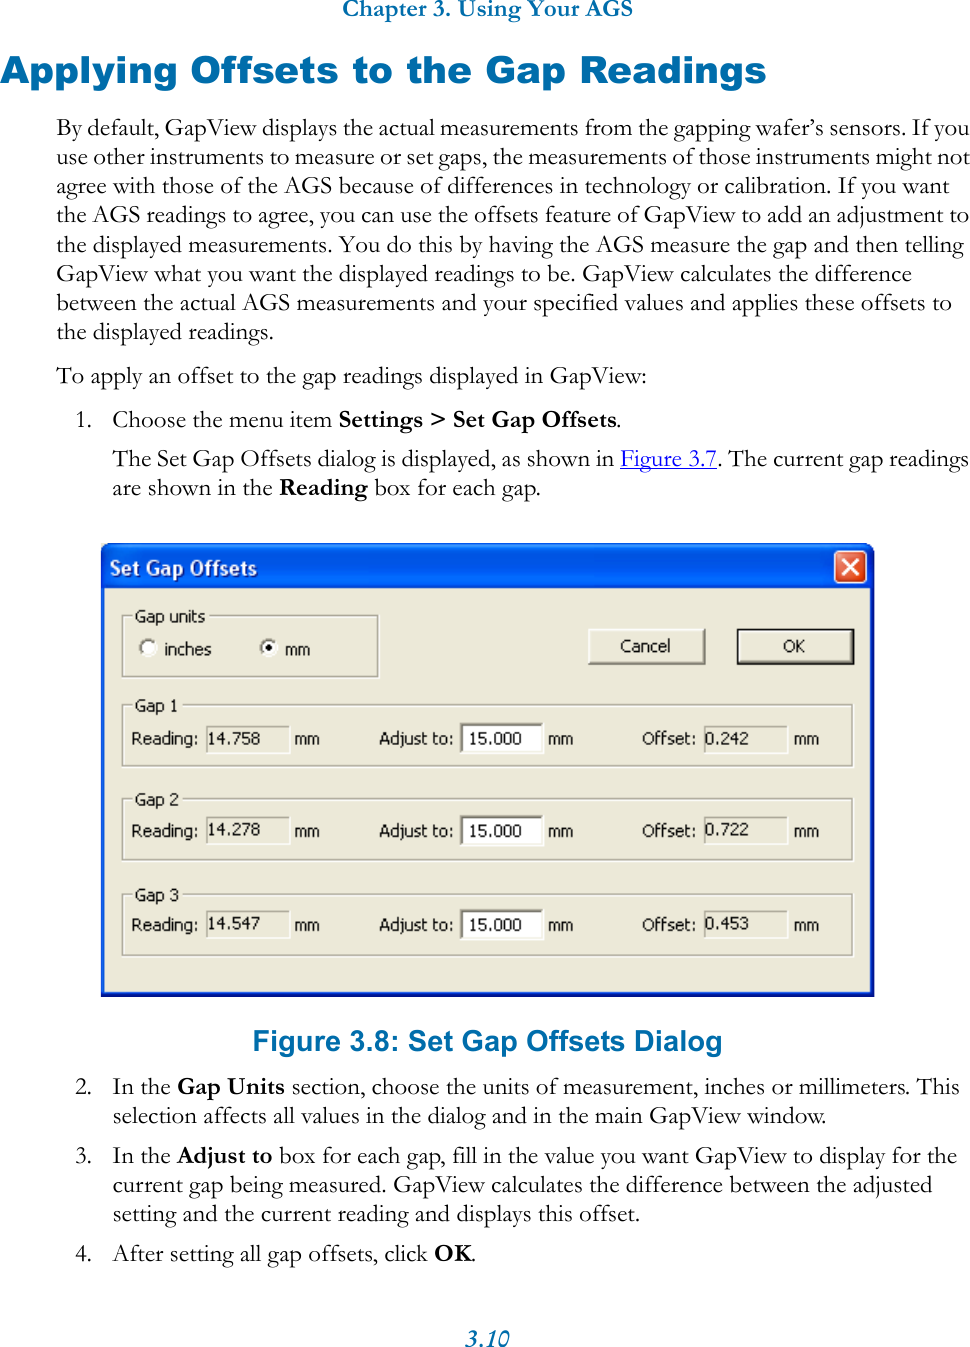 Chapter 3. Using Your AGS3.10Applying Offsets to the Gap ReadingsBy default, GapView displays the actual measurements from the gapping wafer’s sensors. If you use other instruments to measure or set gaps, the measurements of those instruments might not agree with those of the AGS because of differences in technology or calibration. If you want the AGS readings to agree, you can use the offsets feature of GapView to add an adjustment to the displayed measurements. You do this by having the AGS measure the gap and then telling GapView what you want the displayed readings to be. GapView calculates the difference between the actual AGS measurements and your specified values and applies these offsets to the displayed readings.To apply an offset to the gap readings displayed in GapView:1. Choose the menu item Settings &gt; Set Gap Offsets.The Set Gap Offsets dialog is displayed, as shown in Figure 3.7. The current gap readings are shown in the Reading box for each gap. Figure 3.8: Set Gap Offsets Dialog2. In the Gap Units section, choose the units of measurement, inches or millimeters. This selection affects all values in the dialog and in the main GapView window.3. In the Adjust to box for each gap, fill in the value you want GapView to display for the current gap being measured. GapView calculates the difference between the adjusted setting and the current reading and displays this offset.4. After setting all gap offsets, click OK.